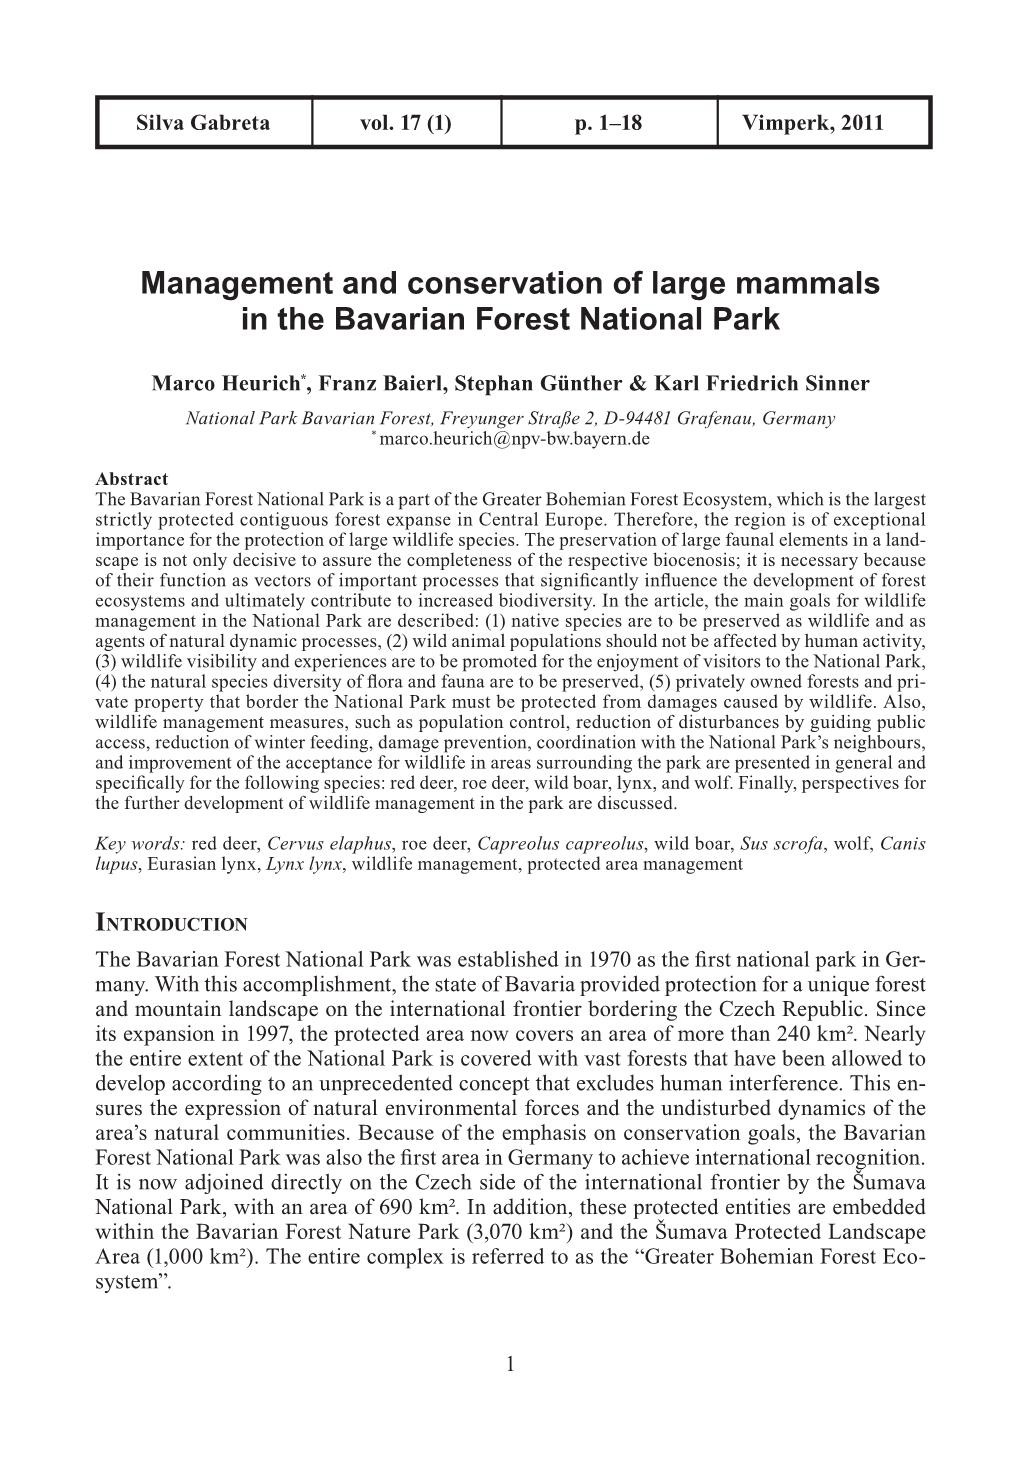 Management and Conservation of Large Mammals in the Bavarian Forest National Park